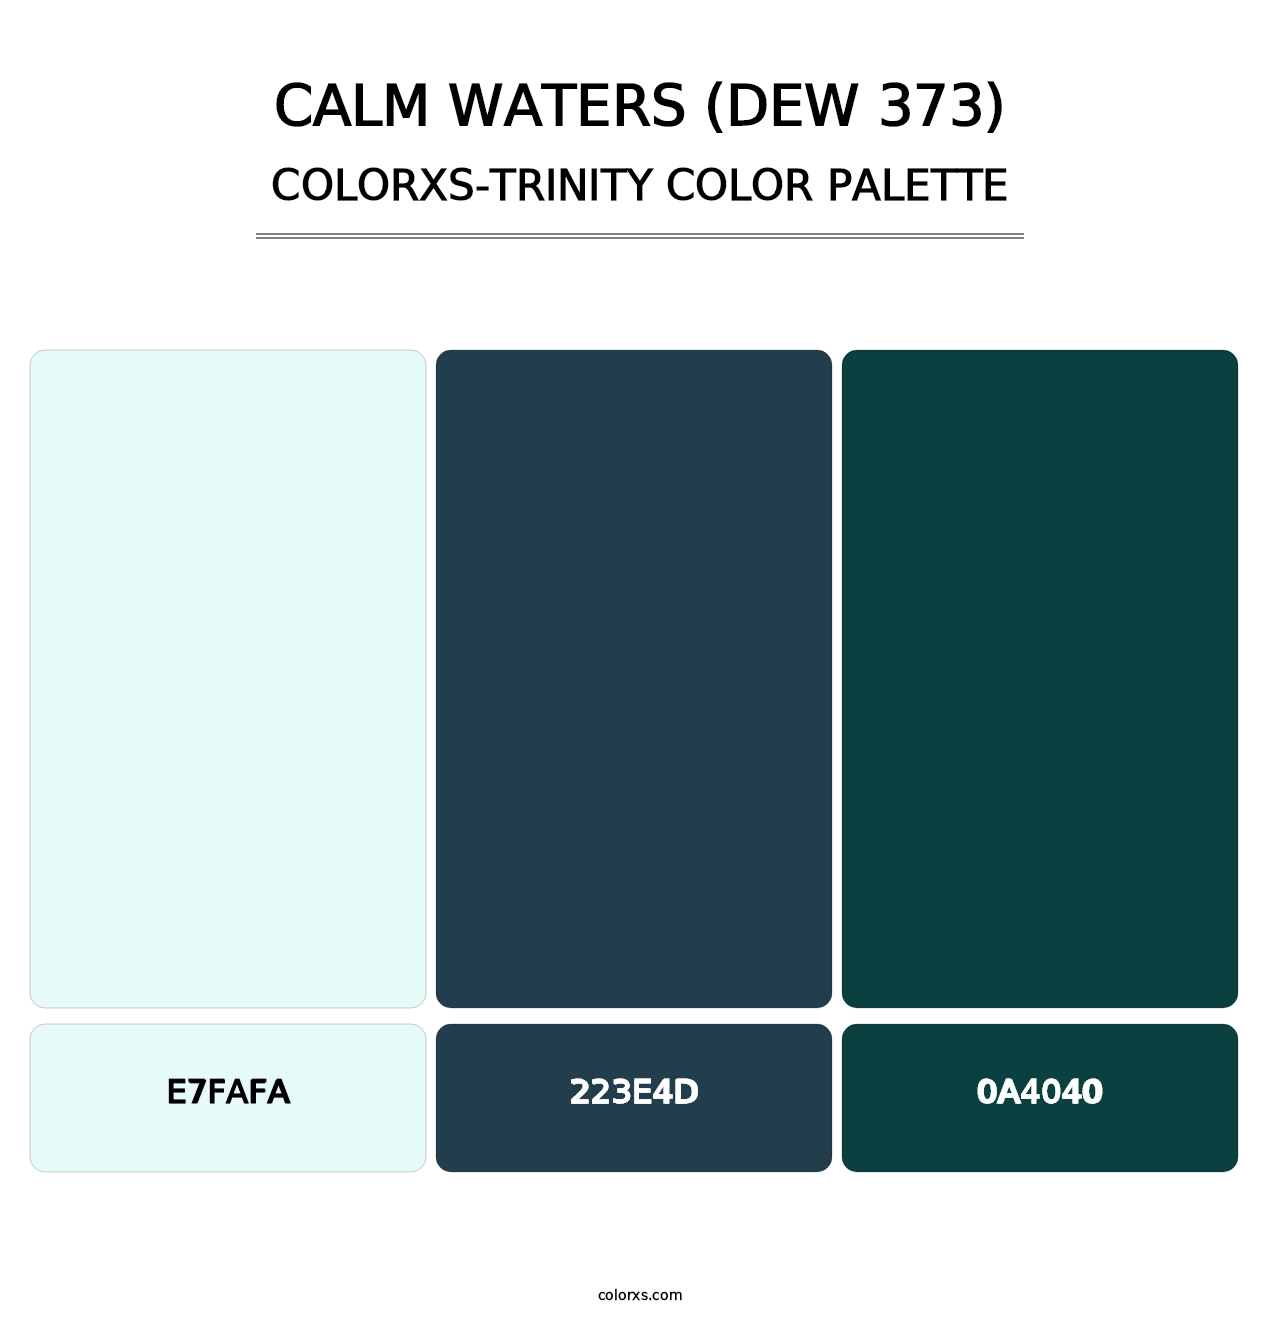 Calm Waters (DEW 373) - Colorxs Trinity Palette